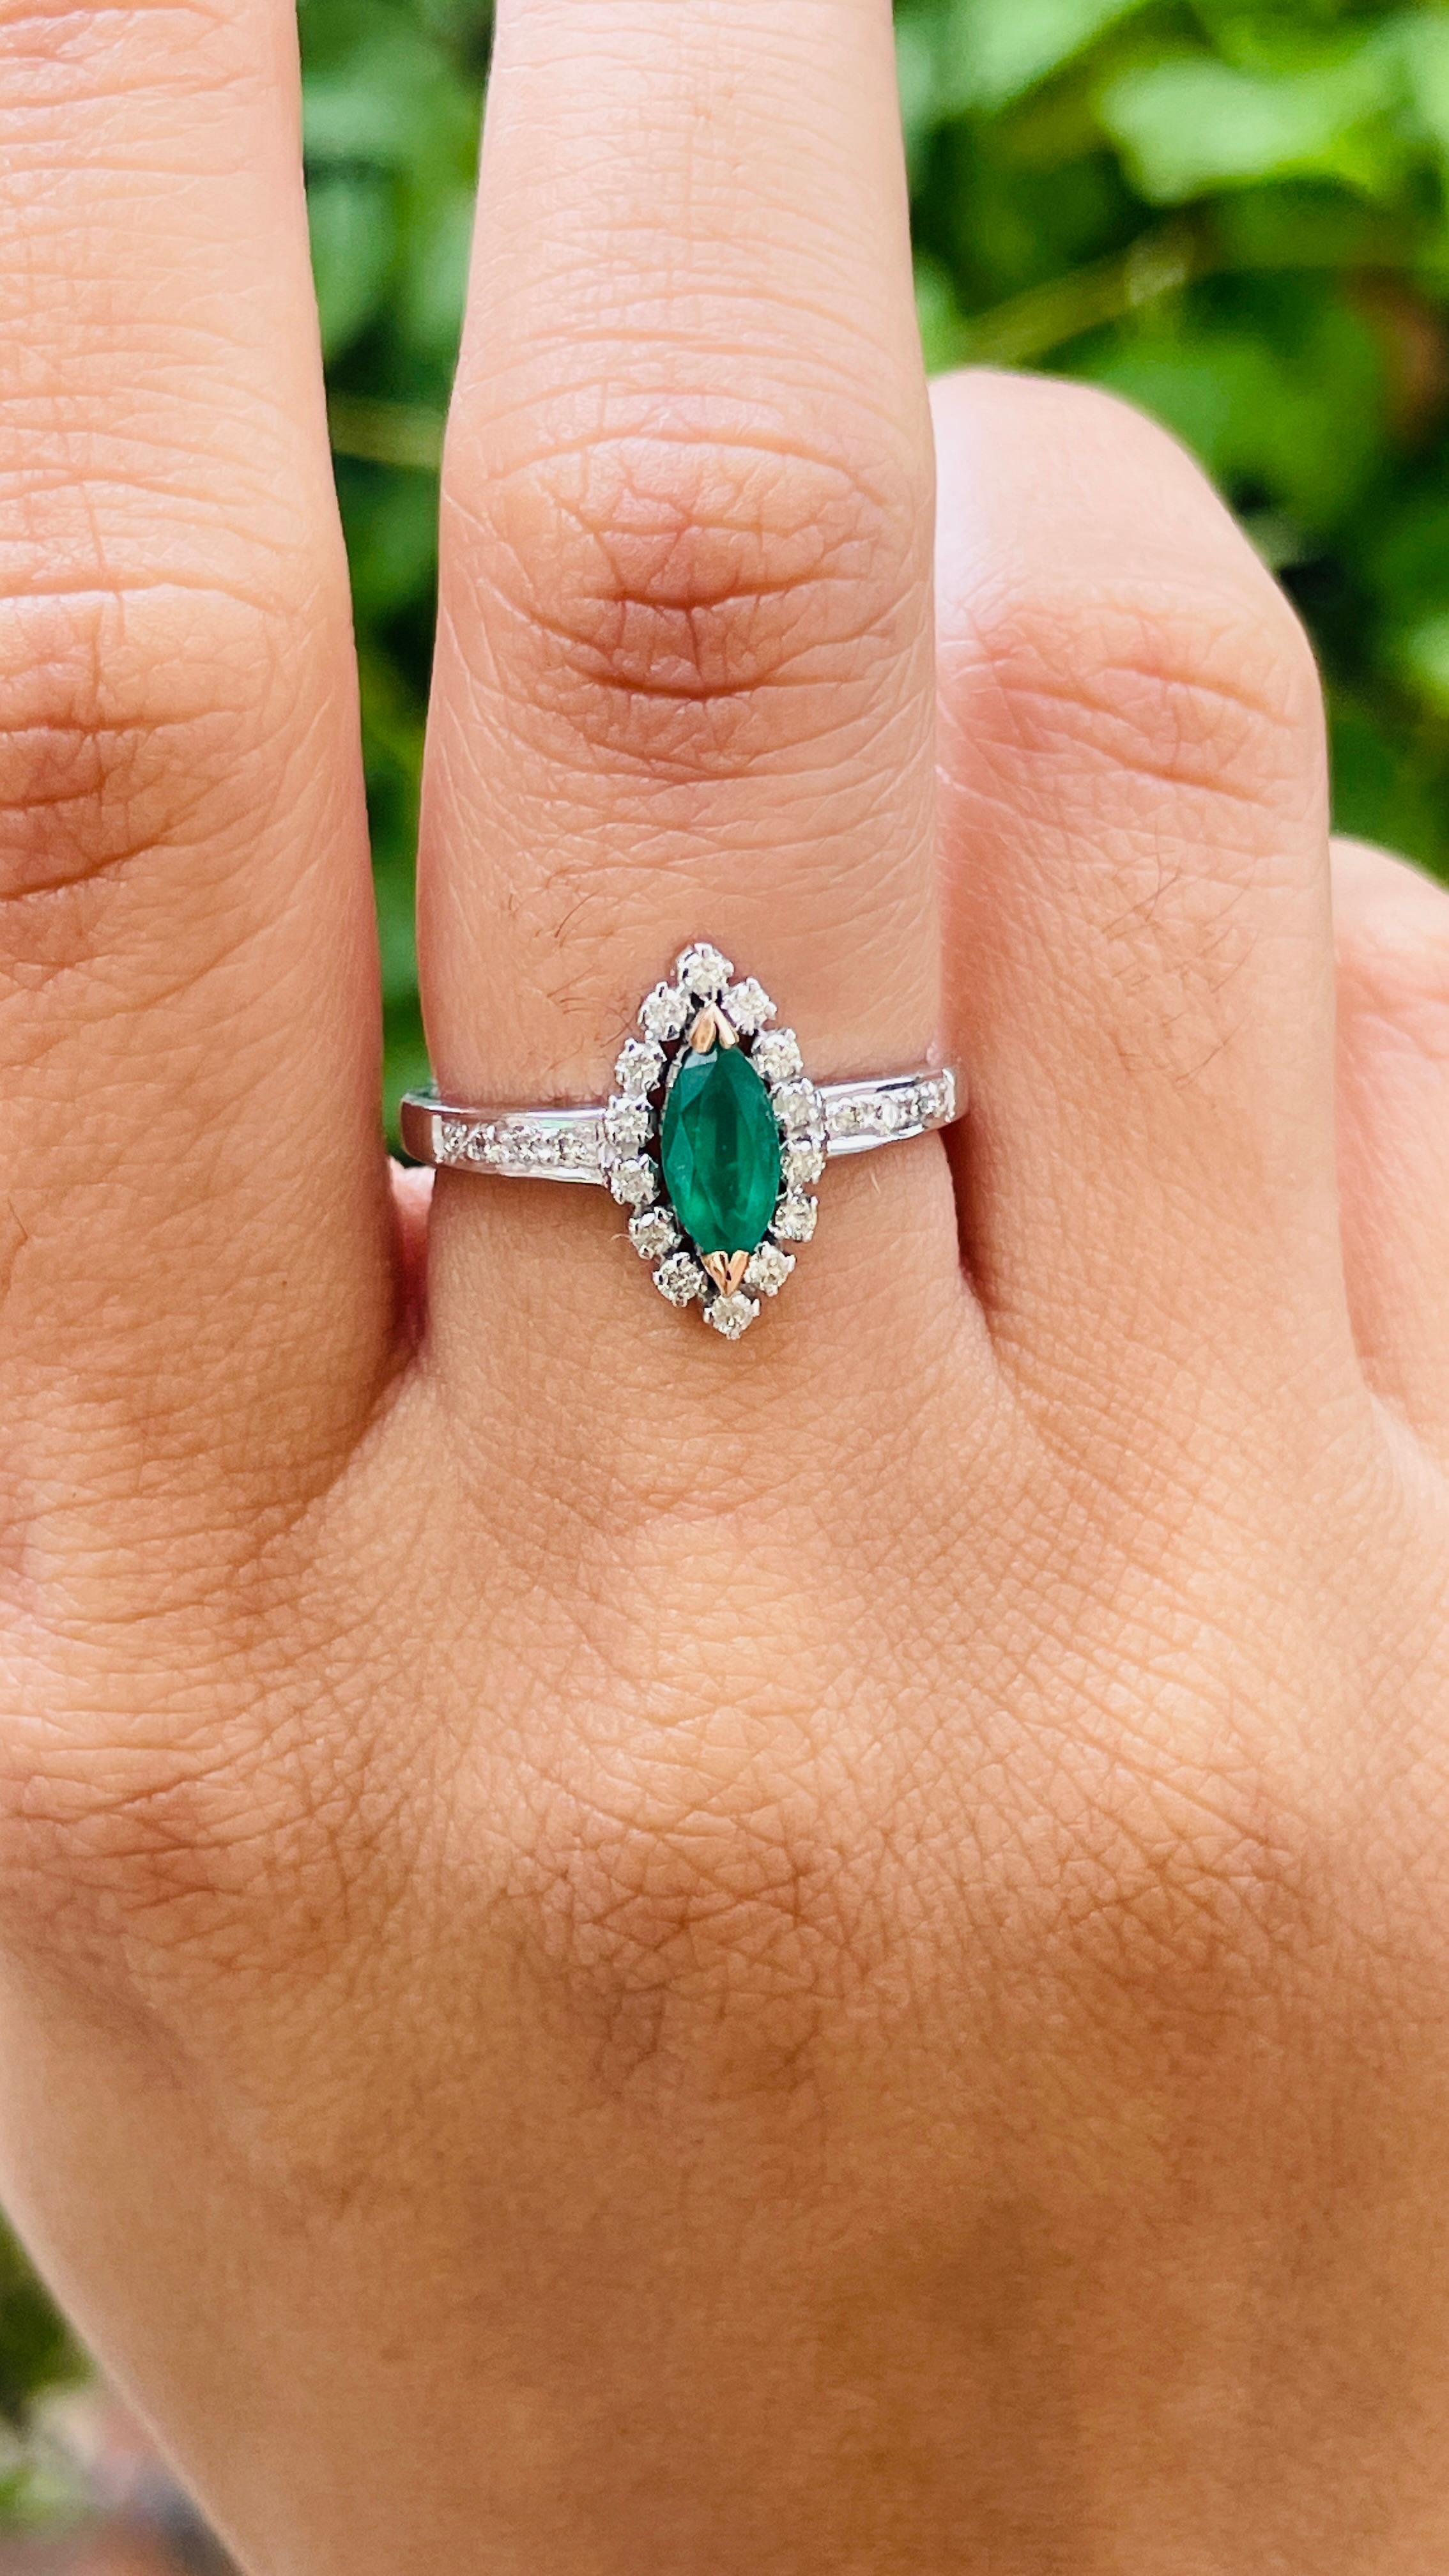 For Sale:  Marquise Shaped Emerald and Diamond Ring in 14K White Gold 4